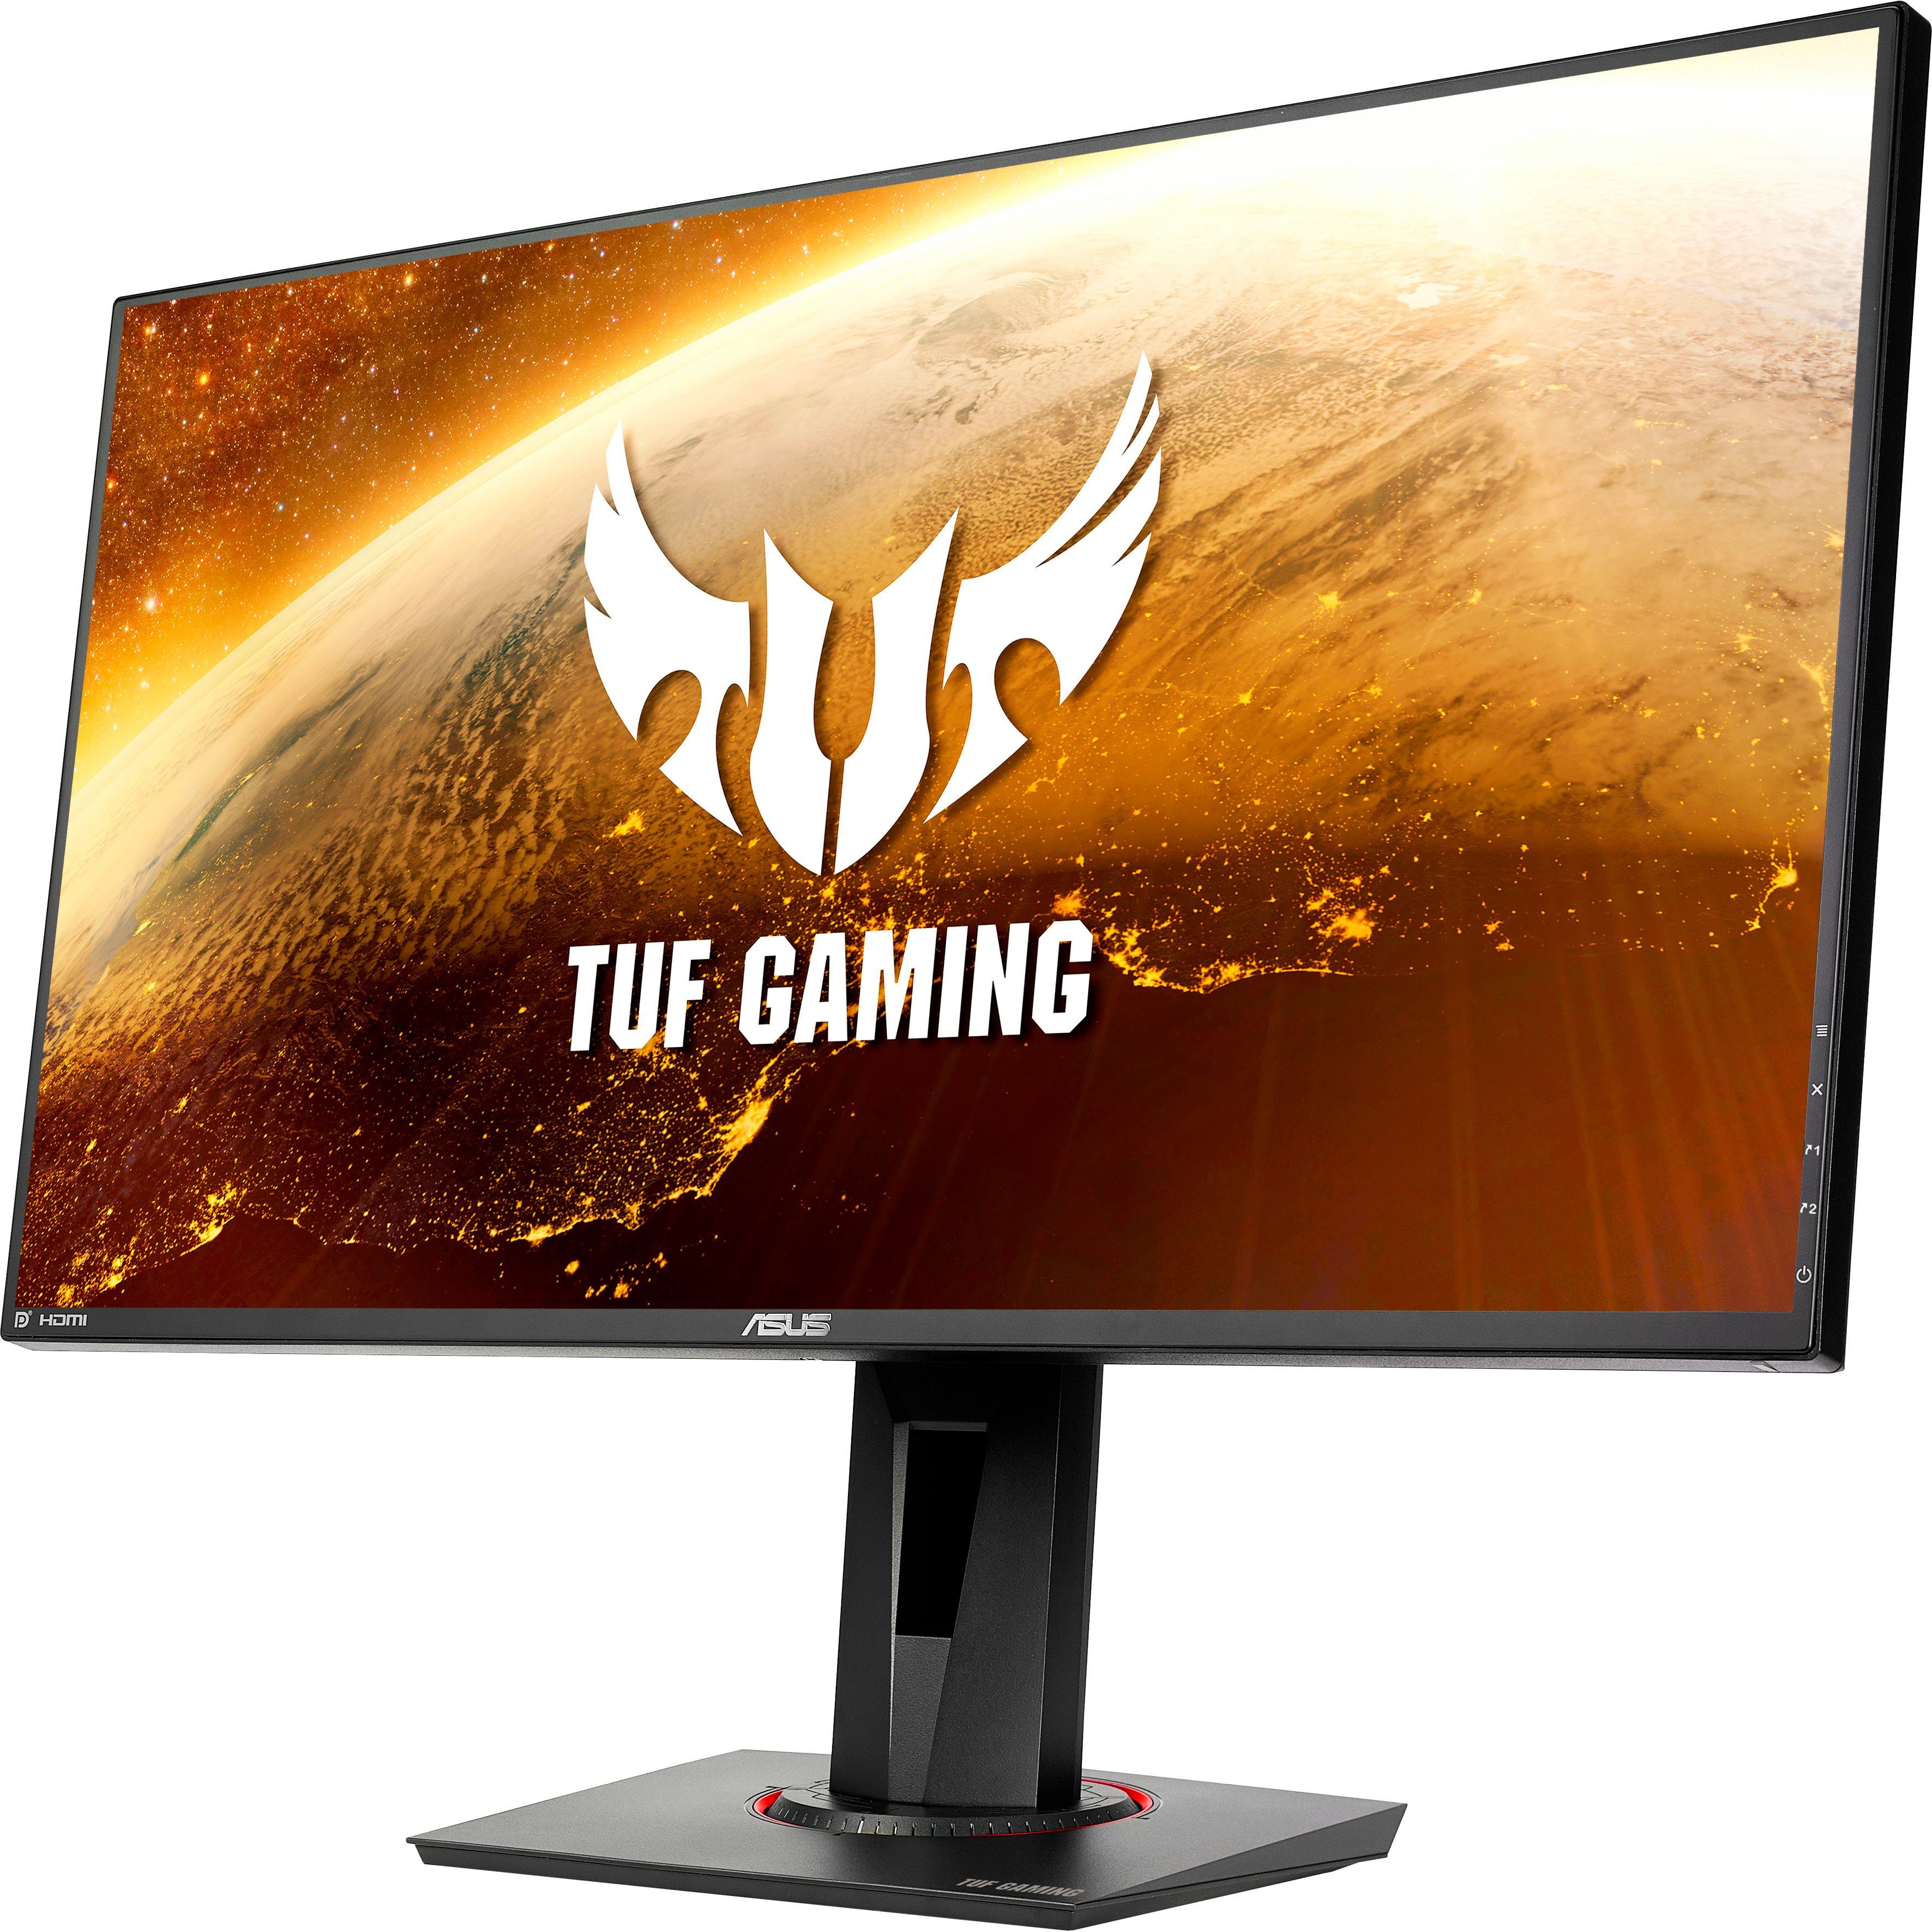 Reaktionszeit, Hz, 1 Asus ms Gaming-Monitor Full cm/27 280 ", LED) x 1080 1920 VG279QM HD, (69 px,